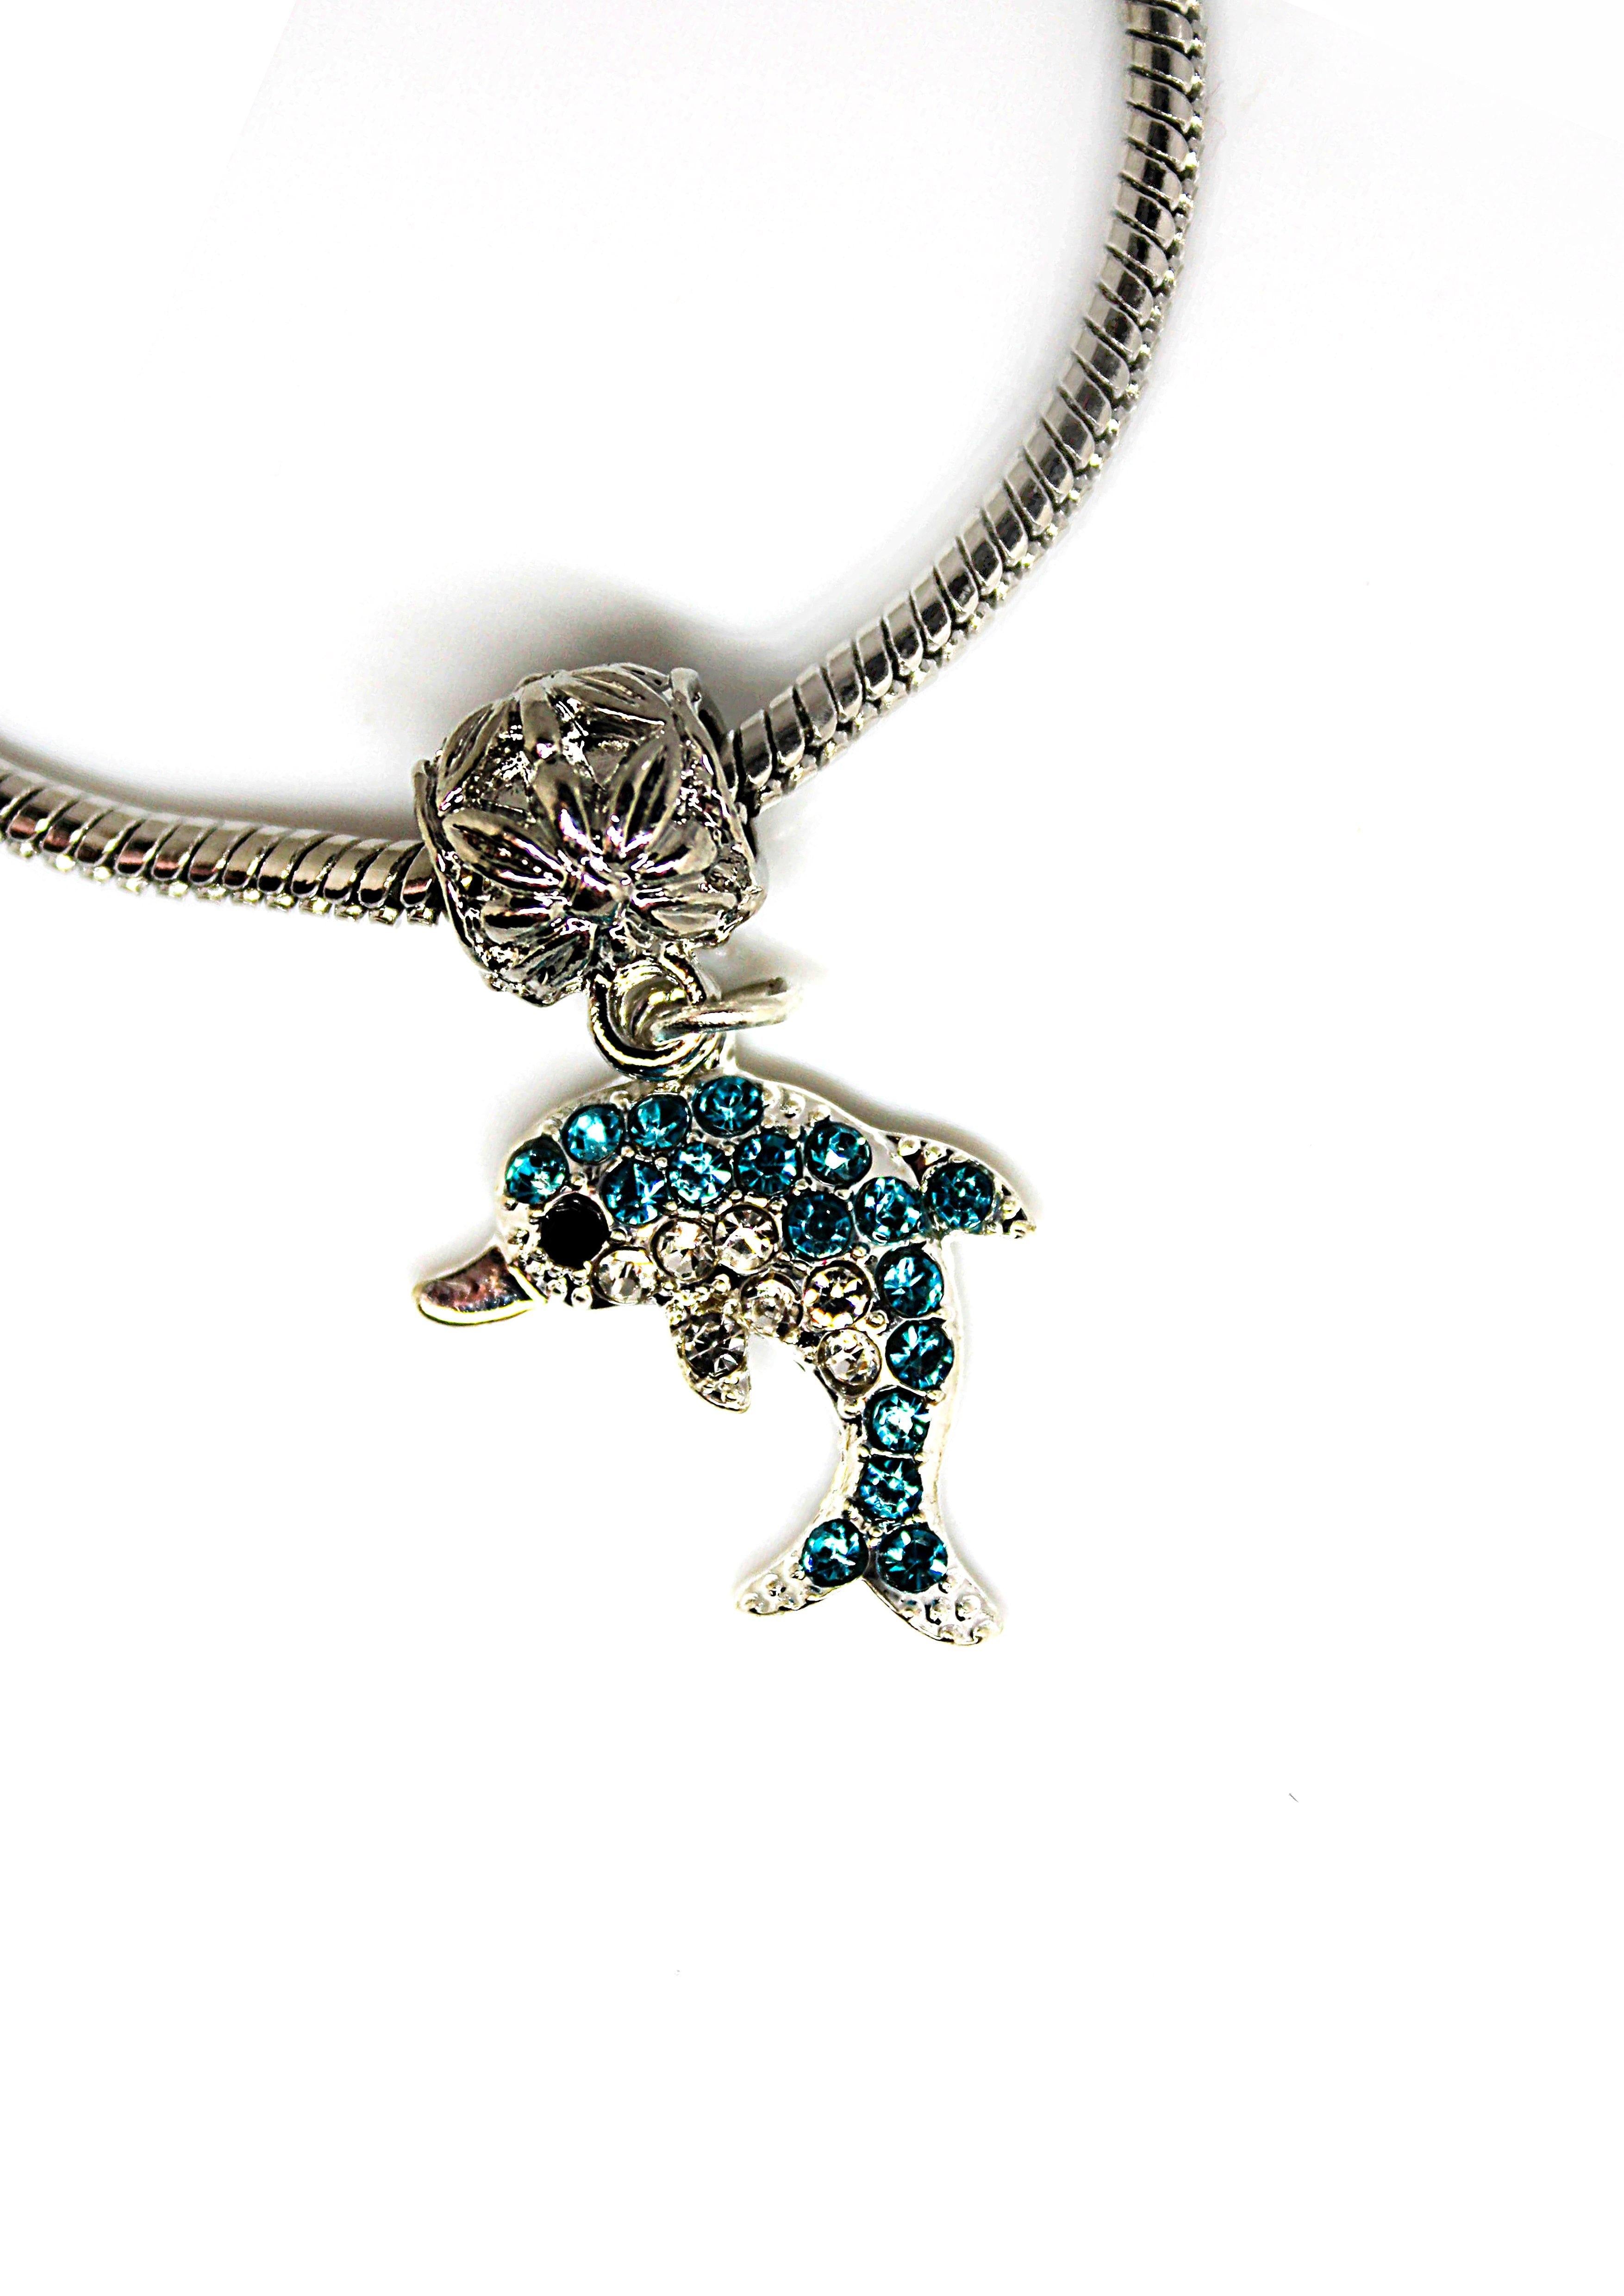 Dolphin Charm Bracelet - Wildtouch - Wildtouch